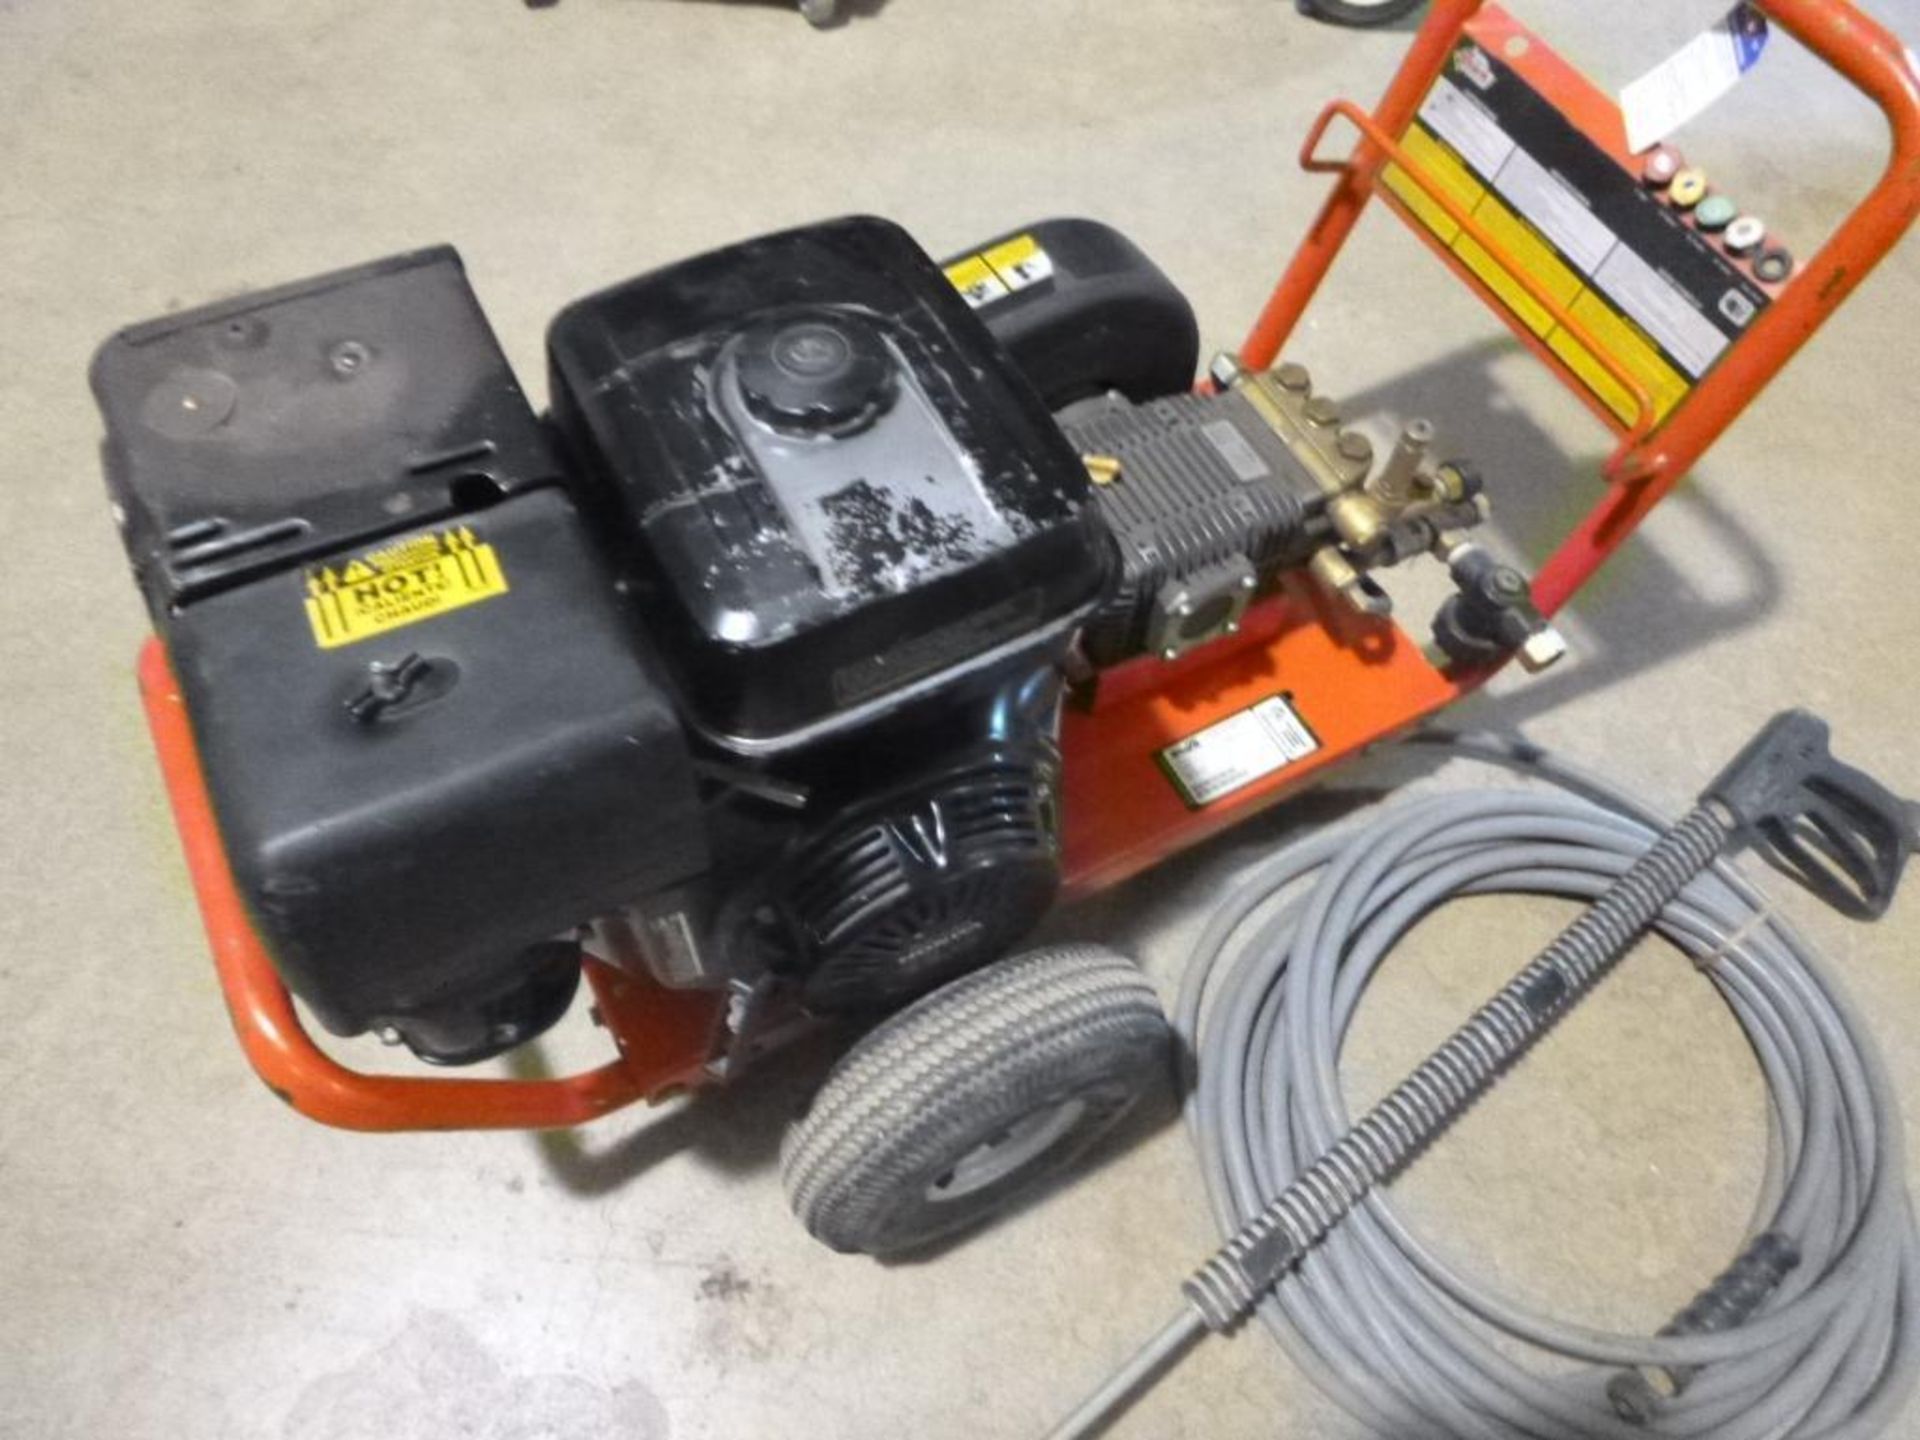 LOT: Washer, Pressure Cold 3000 PSI,; Washer, Pressure Hot 3000 PSI, Mi-TM HSP3003-3MGH - Image 6 of 6